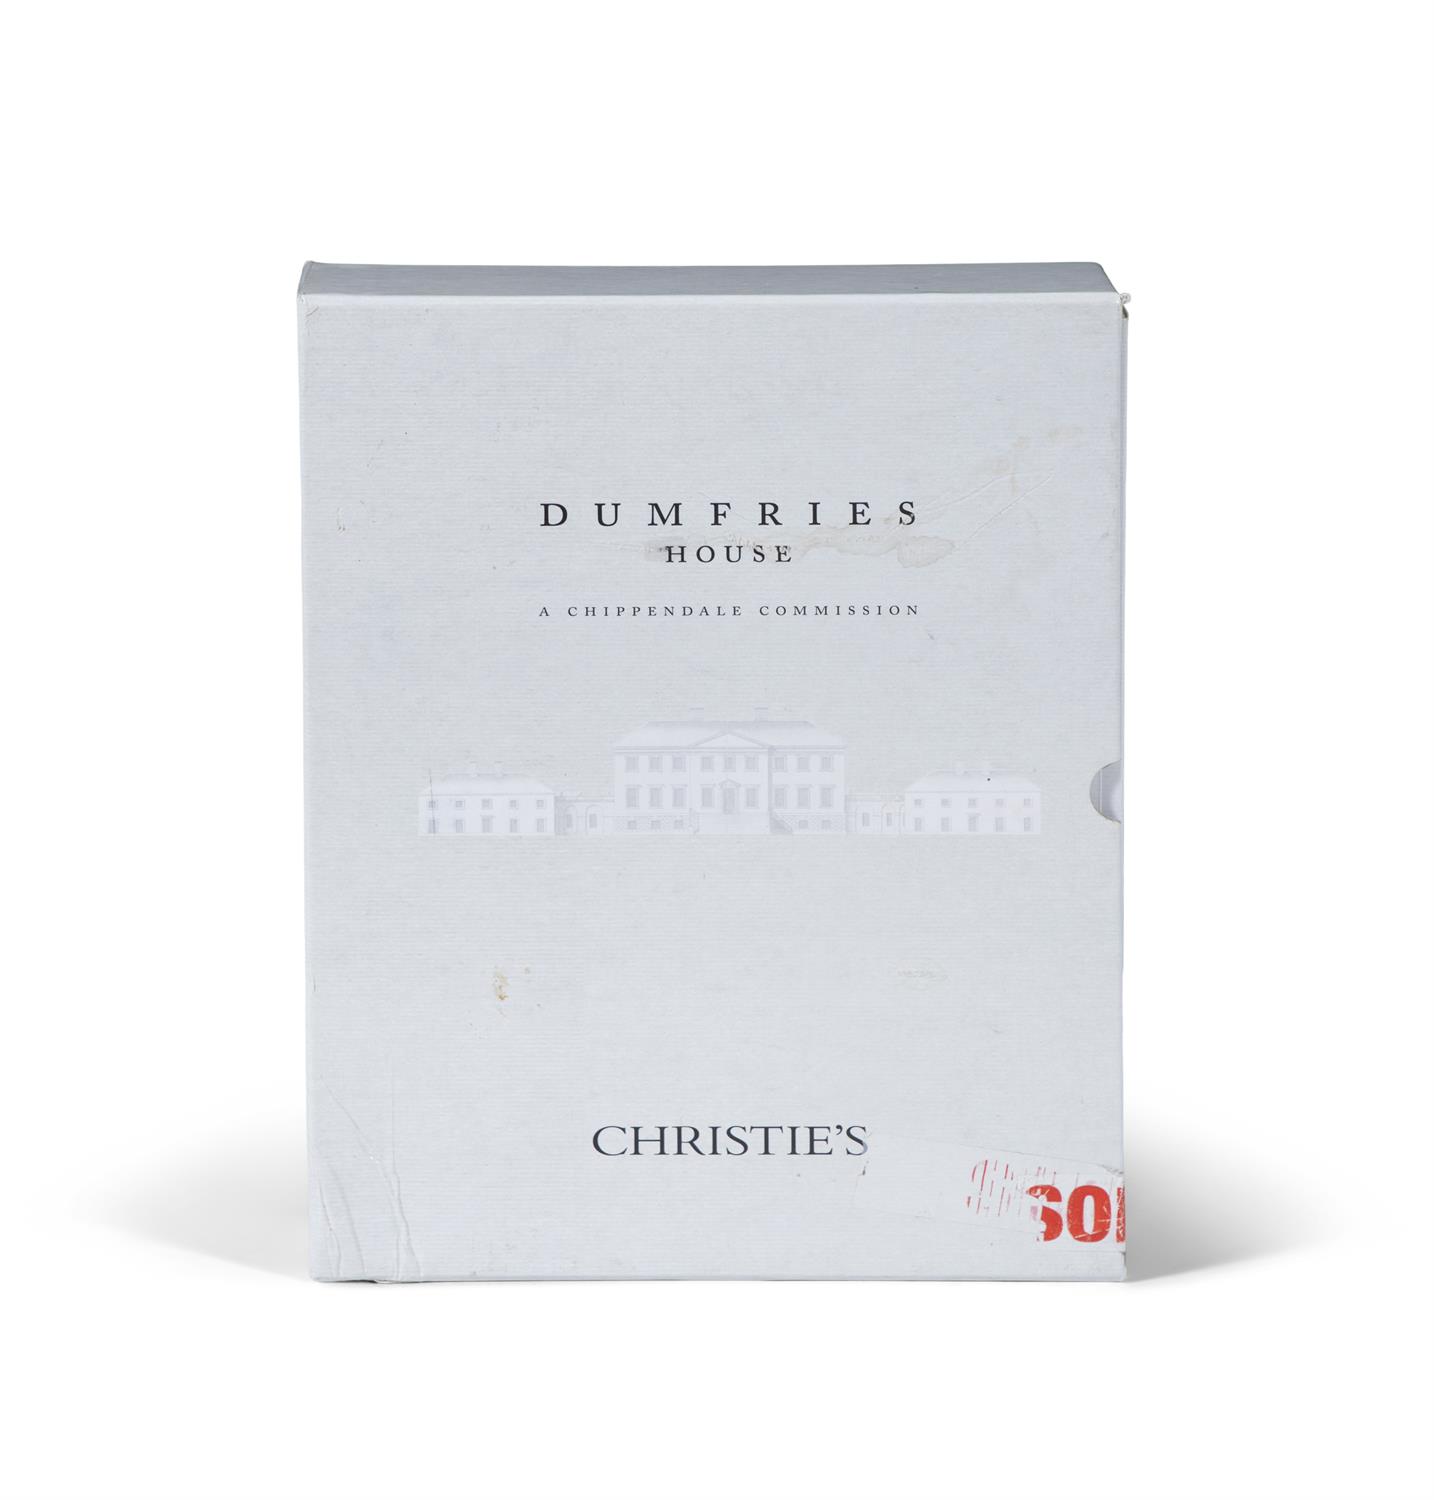 THE CHRISTIE'S DUMFRIES HOUSE CATALOGUES, A rare pair of House Sale catalogues dating to 12th of